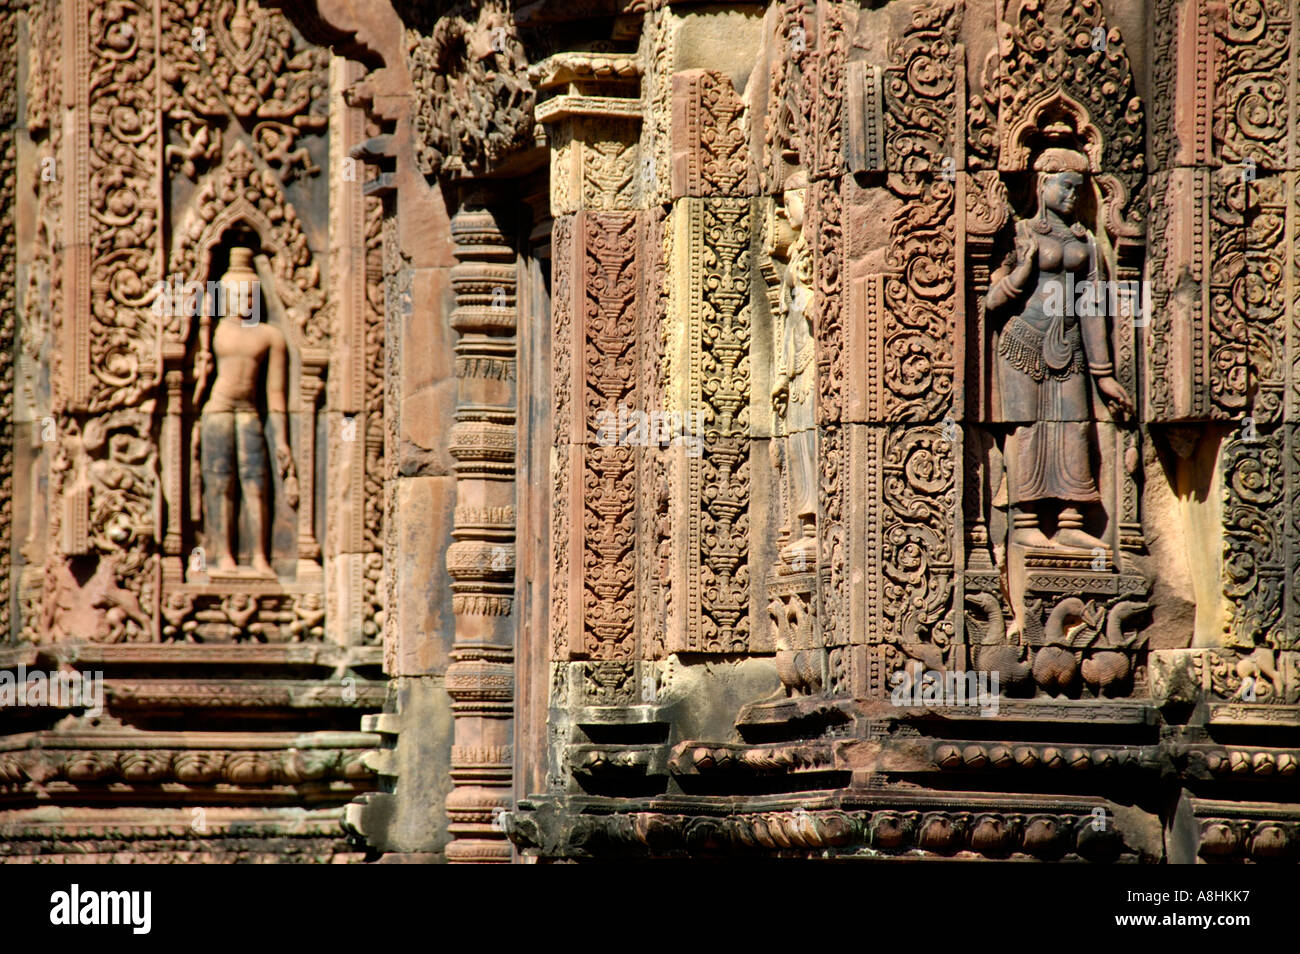 Fine reliefs with Apsera temple dancers Banteay Srei Angkor Siem Reap Cambodia Stock Photo